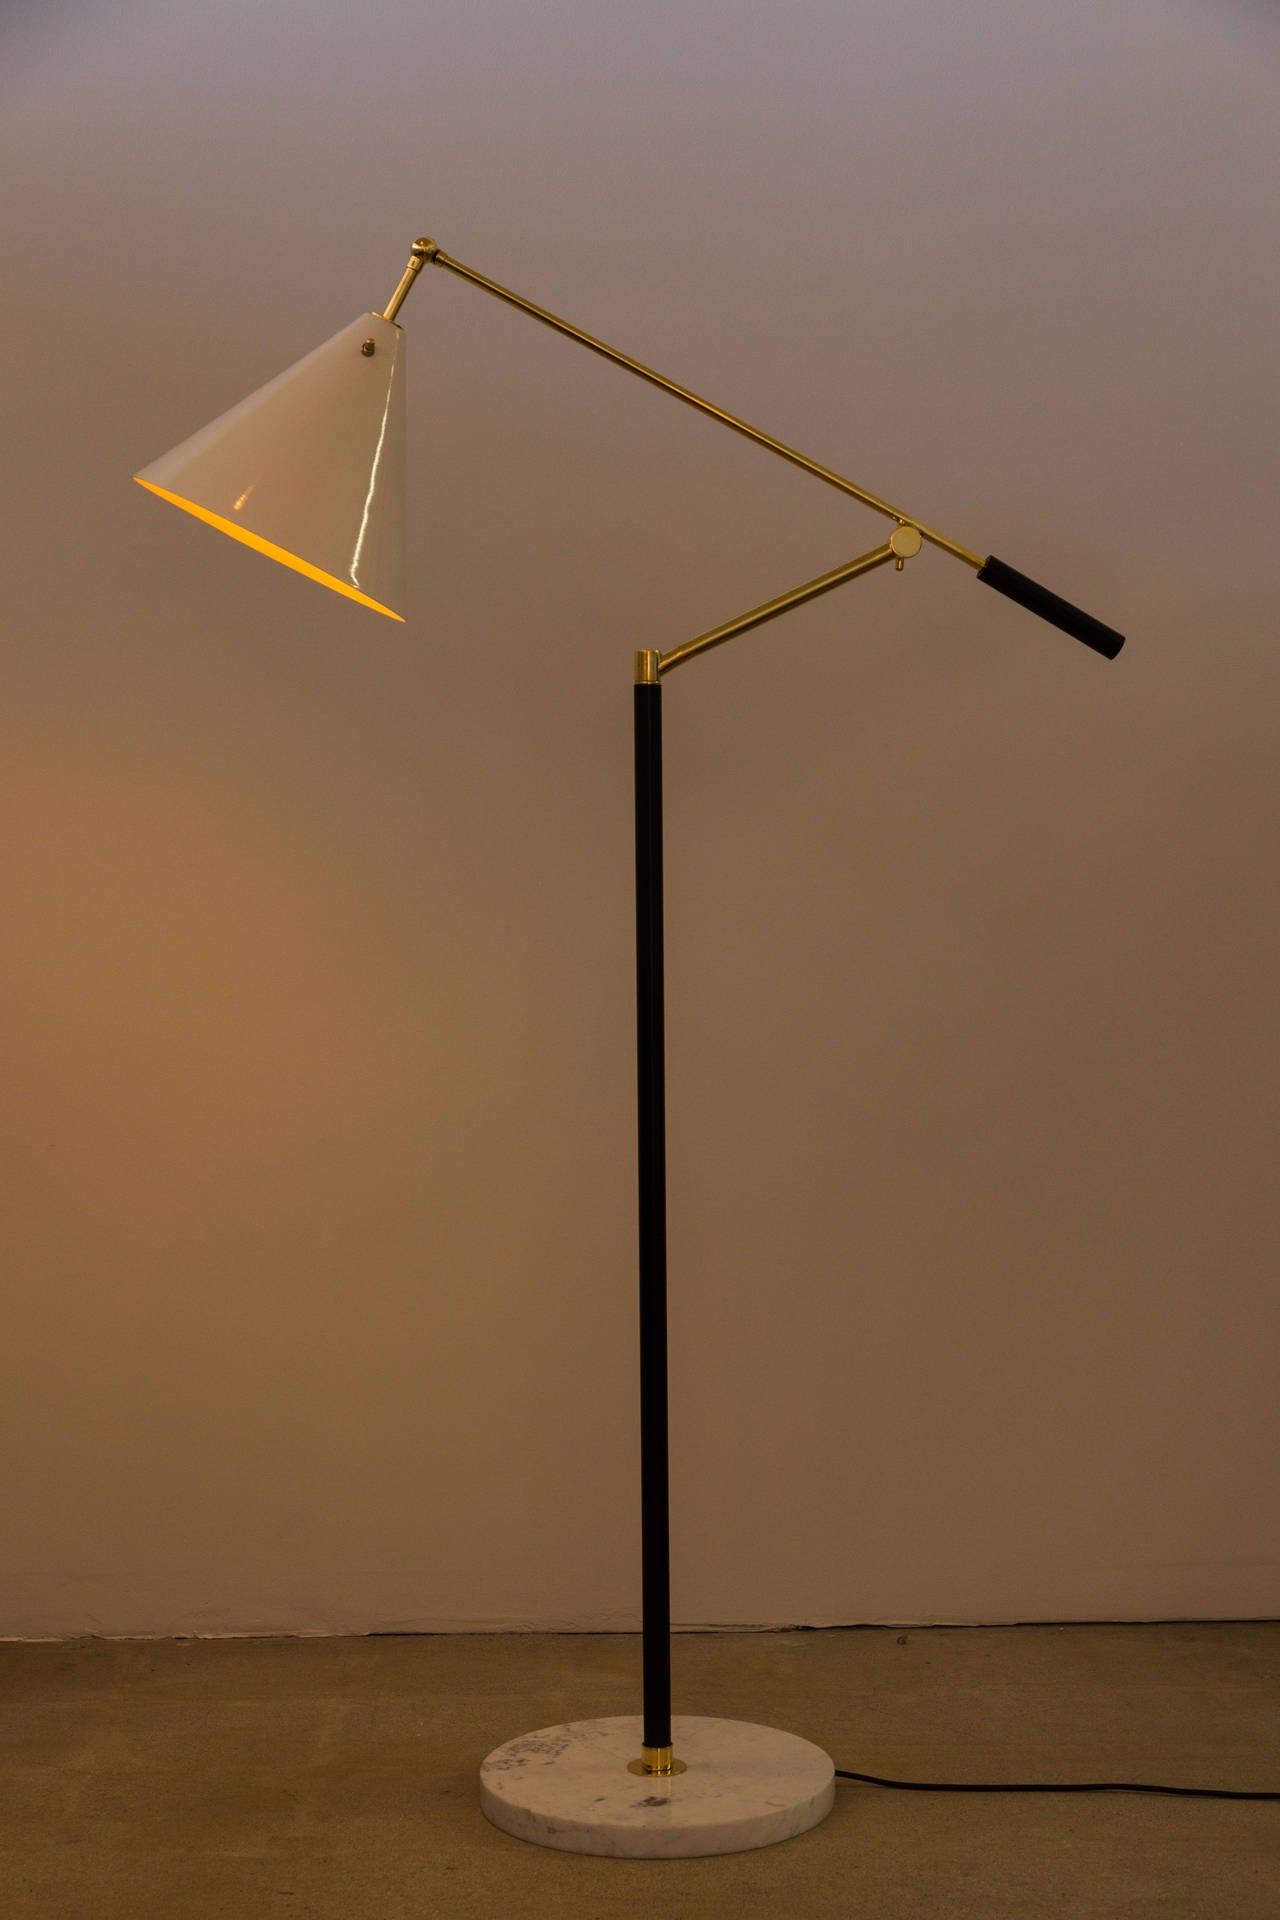 Floor lamp with adjustable arm and shade, marked Made in Italy.